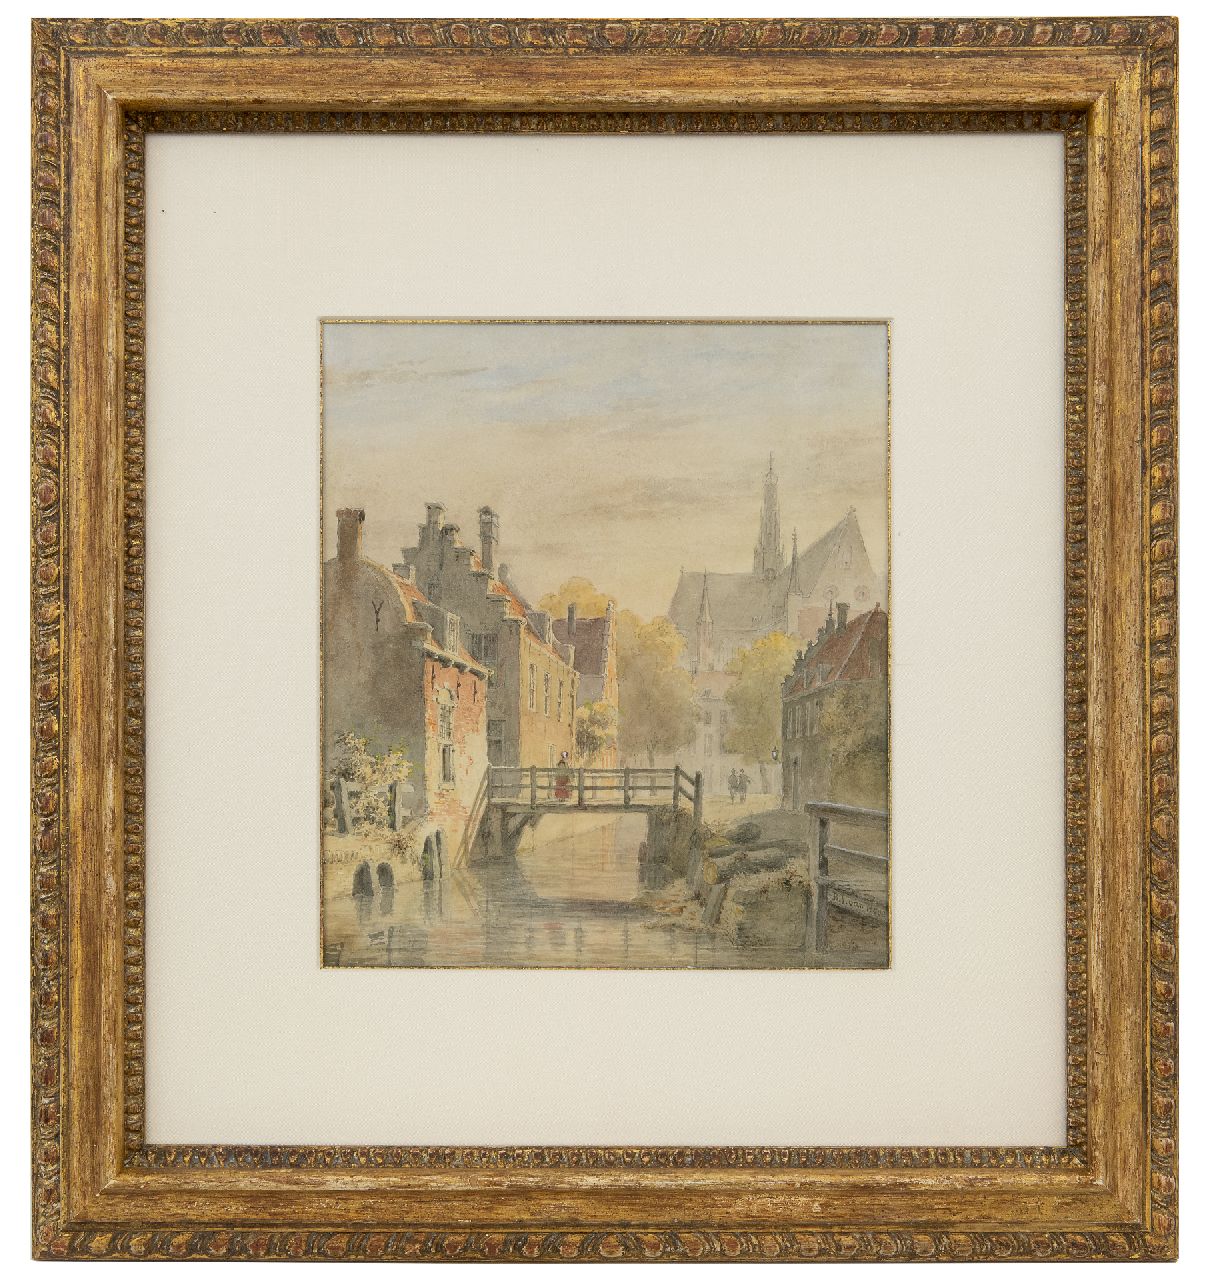 Hove B.J. van | Bartholomeus Johannes 'Bart' van Hove | Watercolours and drawings offered for sale | A tow view k of Haarlem with the Sint-Bavoker, watercolour on paper 27.5 x 24.5 cm, signed l.r.